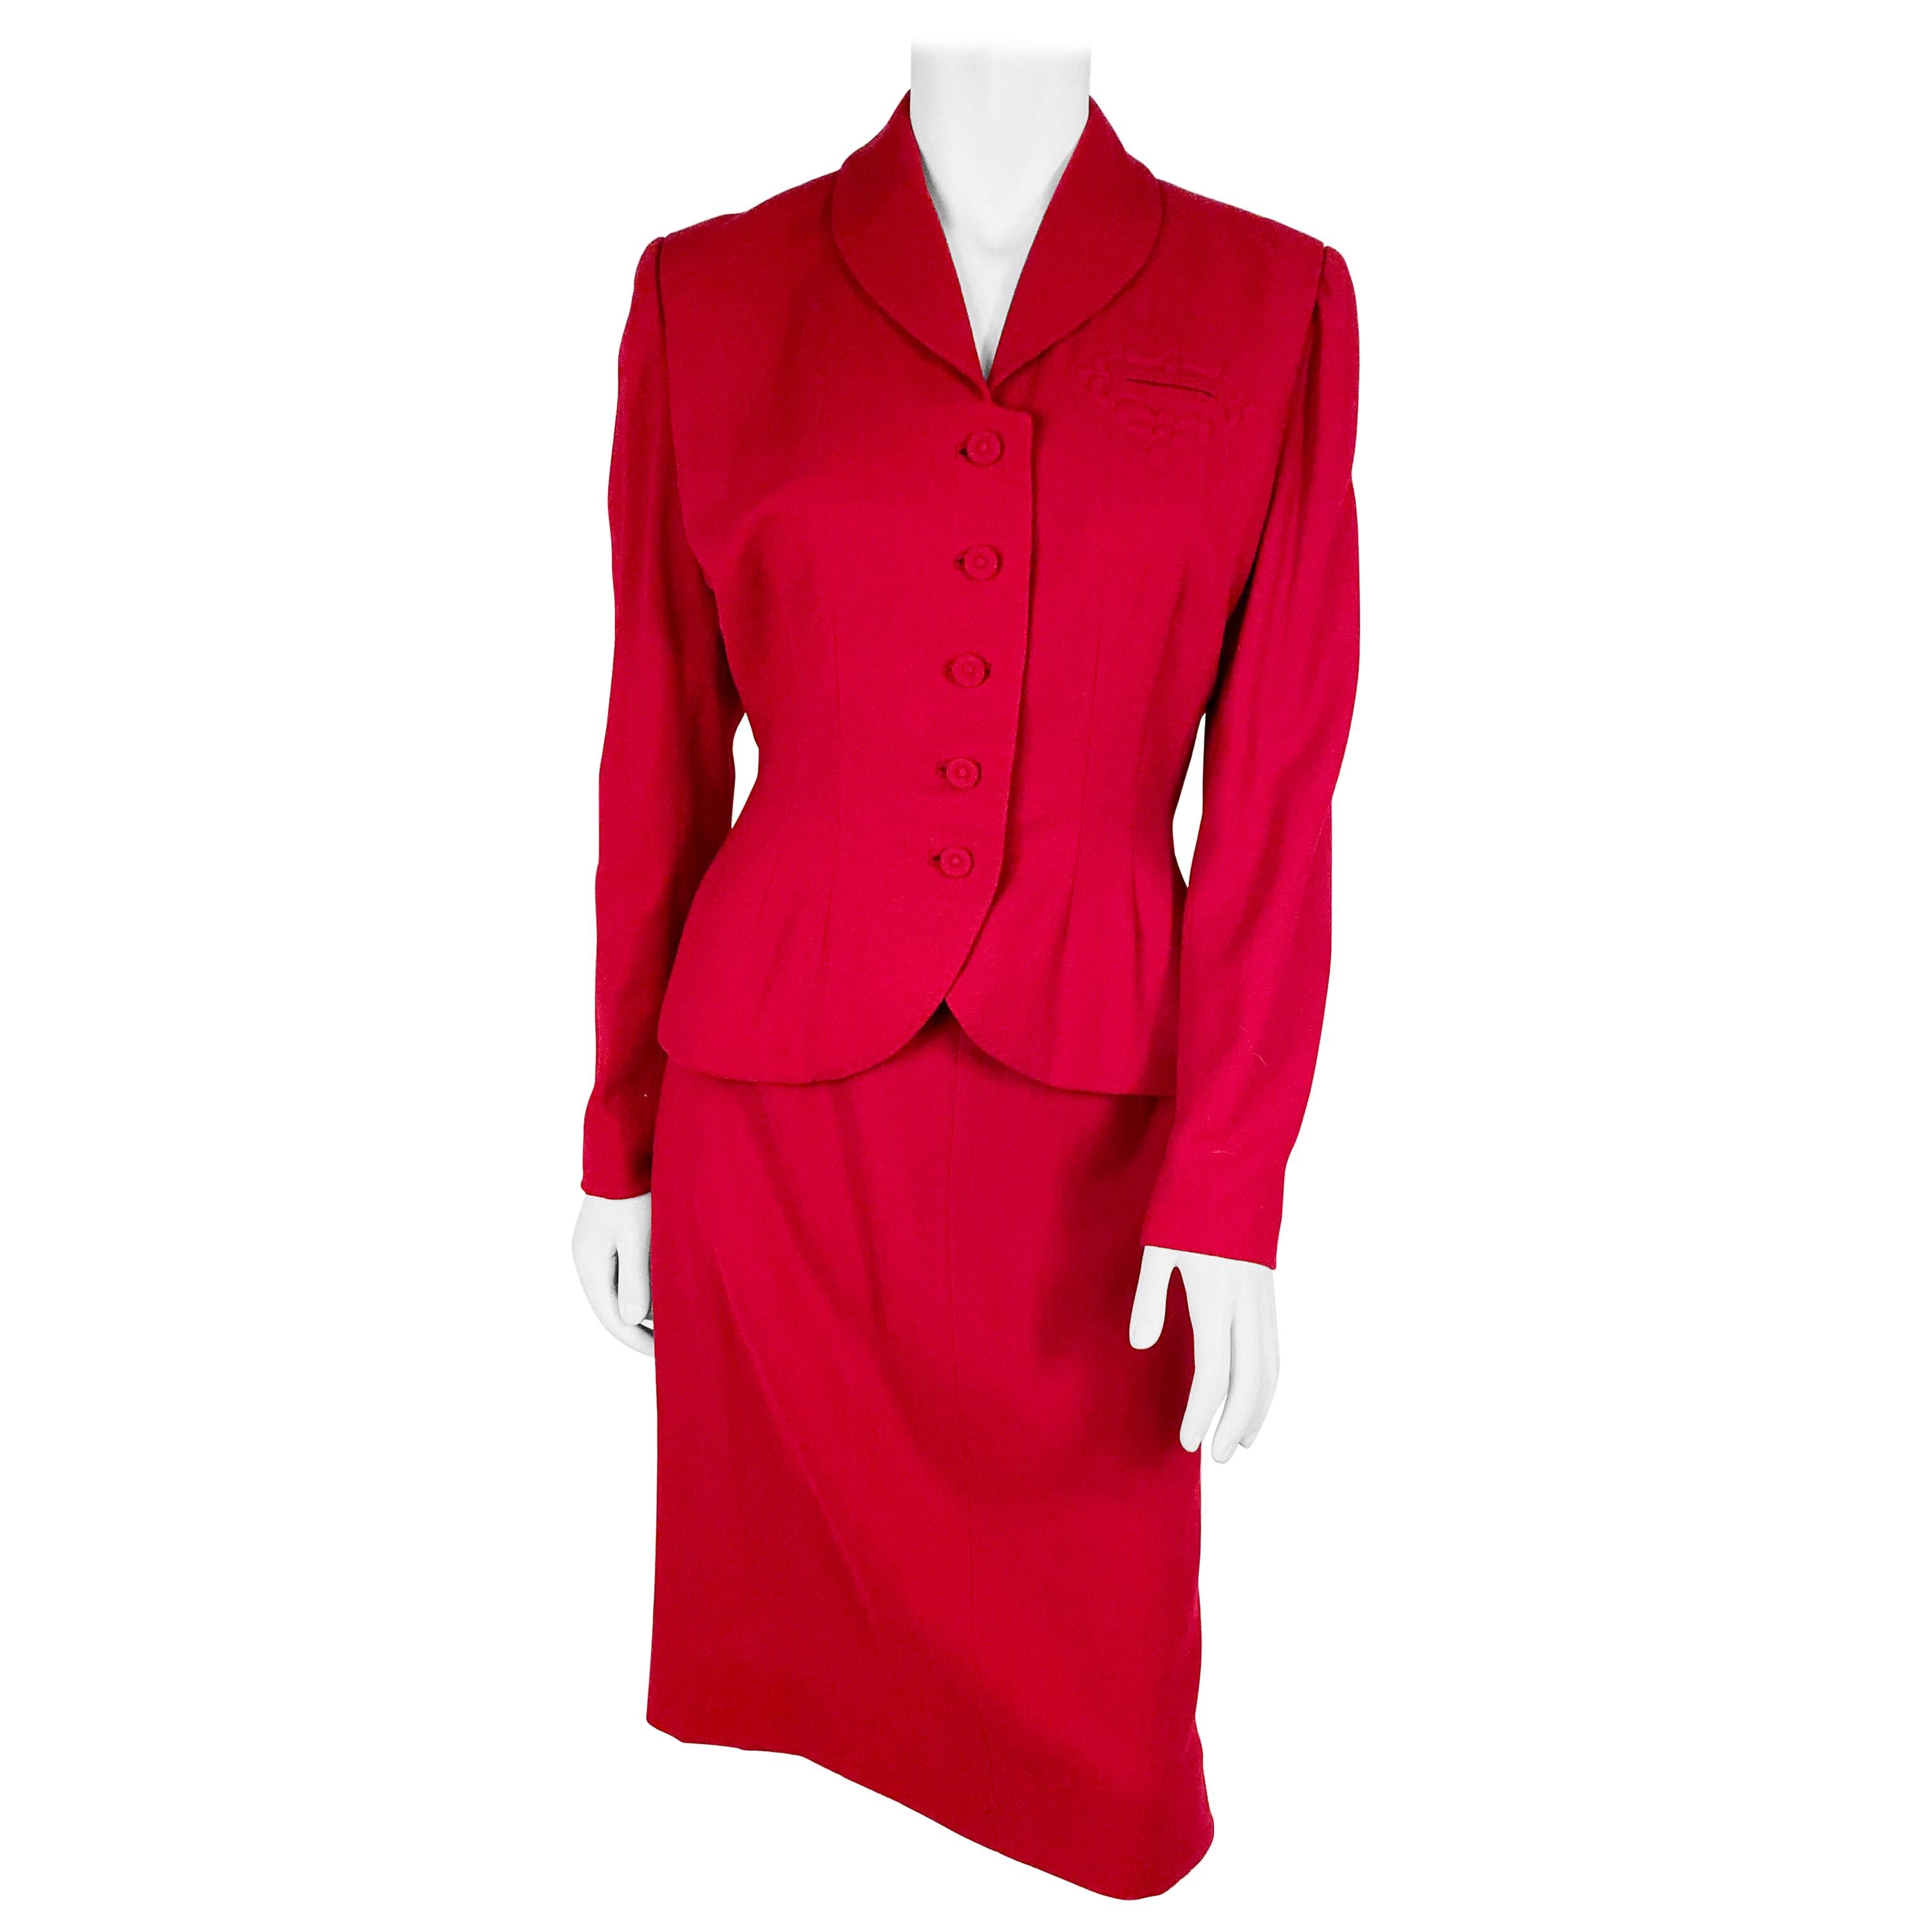 1950s Cranberry Red Suit with Trapunto Embroidery